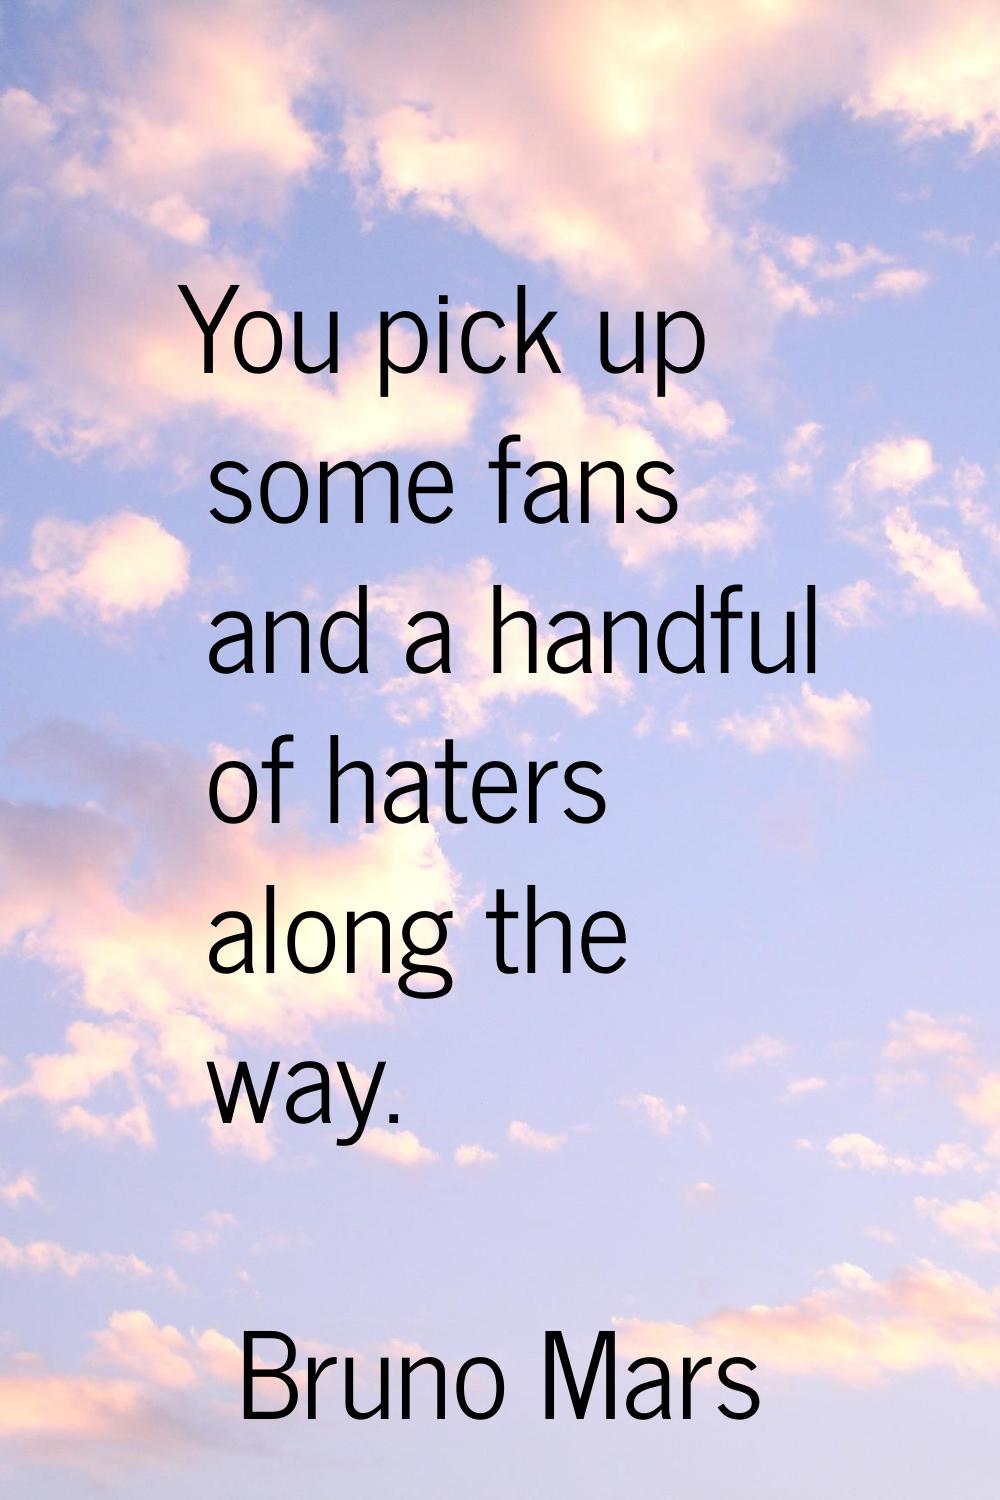 You pick up some fans and a handful of haters along the way.